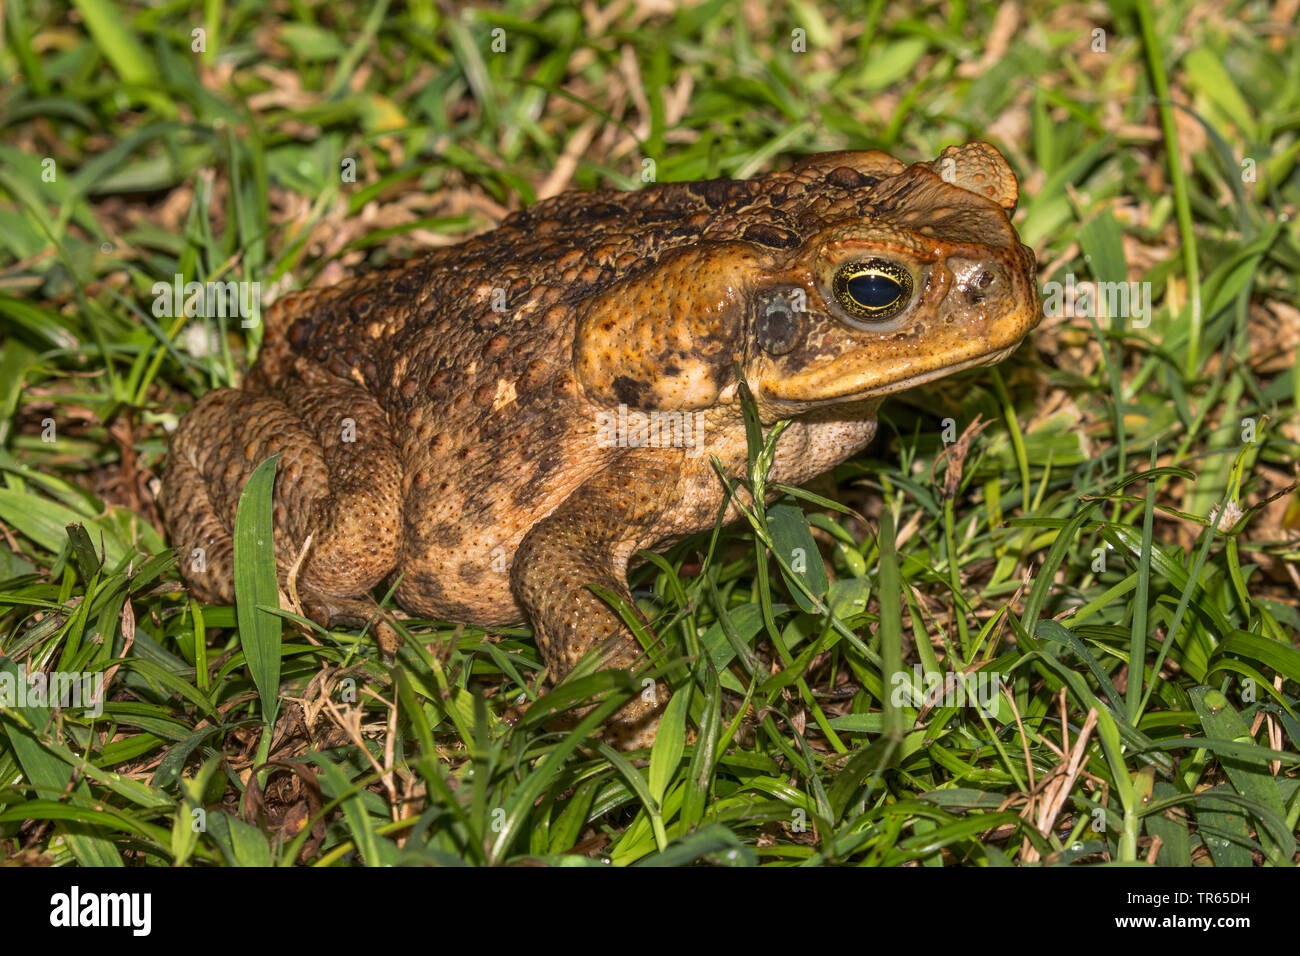 Giant toad, Marine toad, Cane toad, South American Neotropical toad (Bufo marinus, Rhinella marina), sitting in a meadow, side view, USA, Hawaii, Maui, Kihei Stock Photo